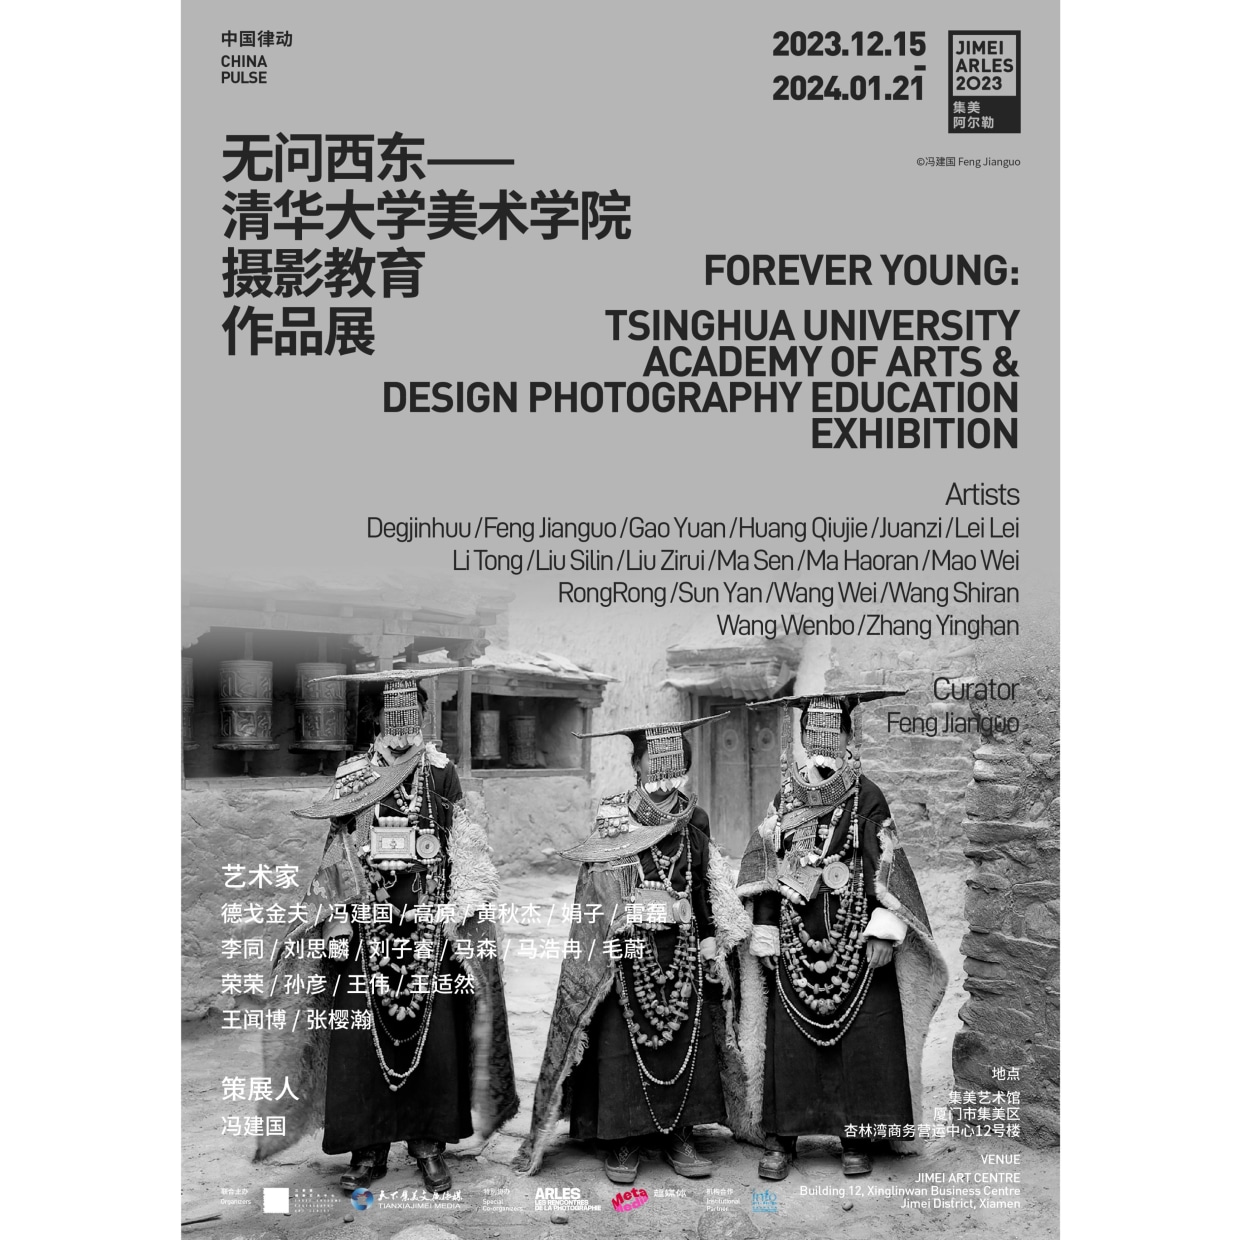 FOREVER YOUNG: TSINGHUA UNIVERSITY ACADEMY OF ARTS & DESIGN PHOTOGRAPHY EDUCATION EXHIBITION In the school anthem of Tsinghua University, a...